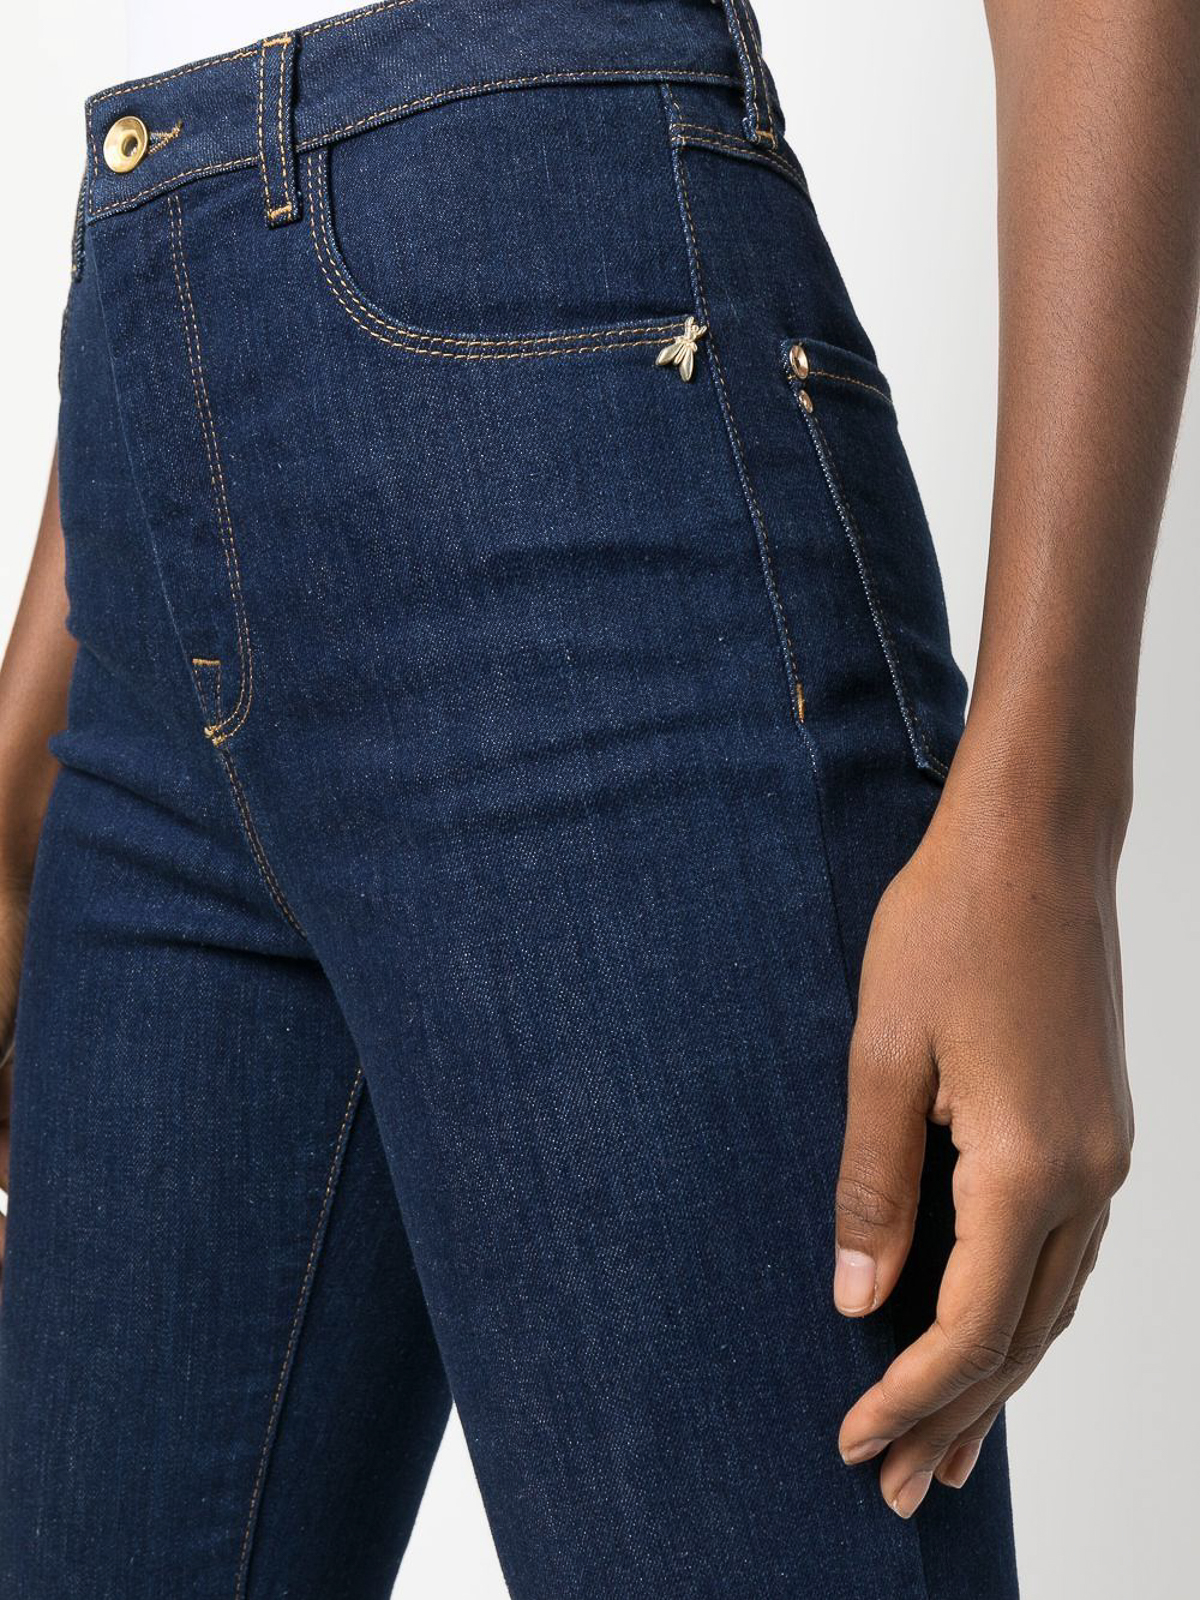 vier keer Frustratie afdeling Bootcut jeans Patrizia Pepe - straight leg jeans with seams - 8P0502D034C170